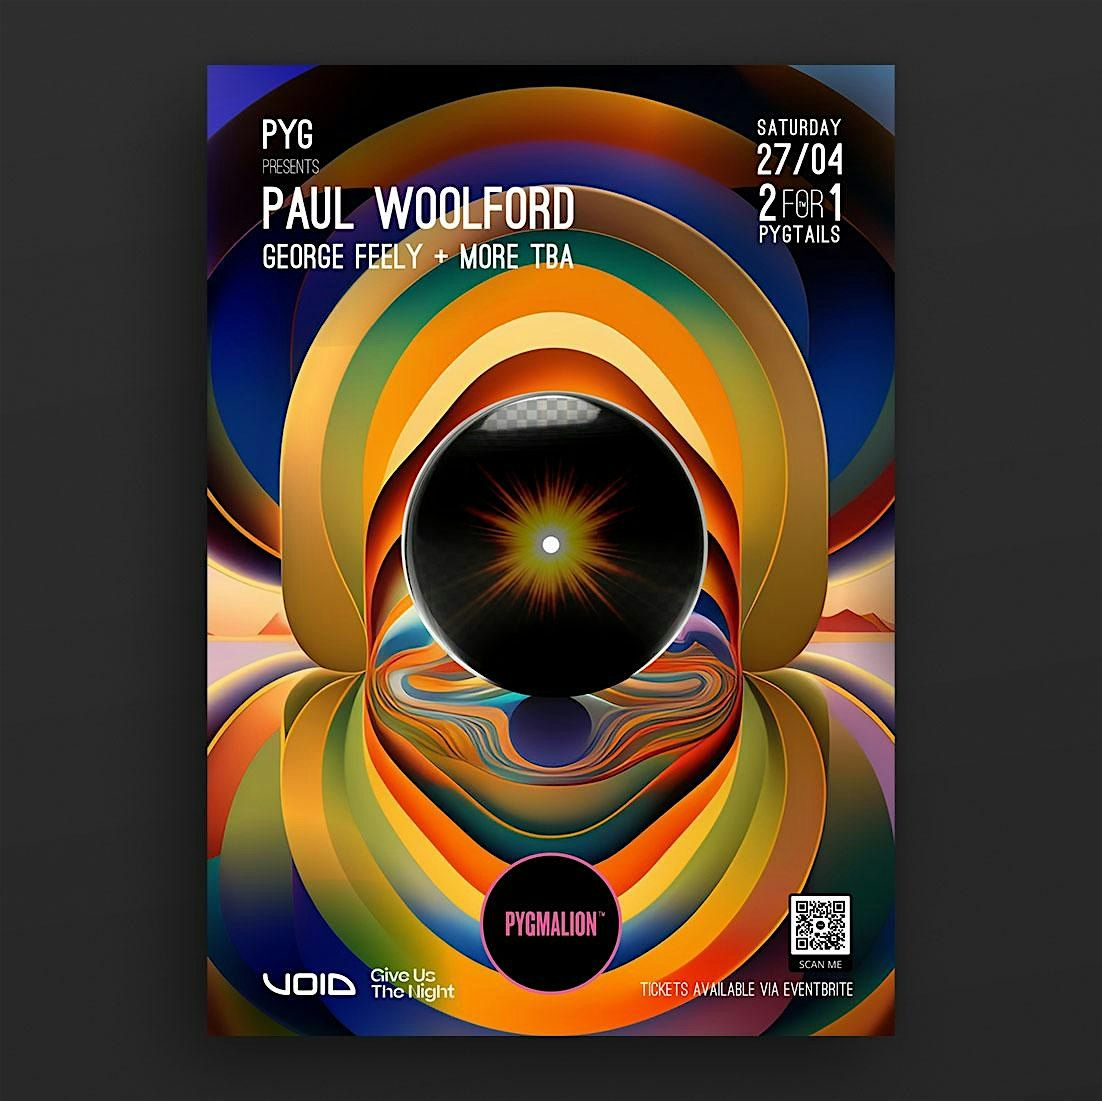 Pyg presents Paul Woolford - Saturday March 2nd